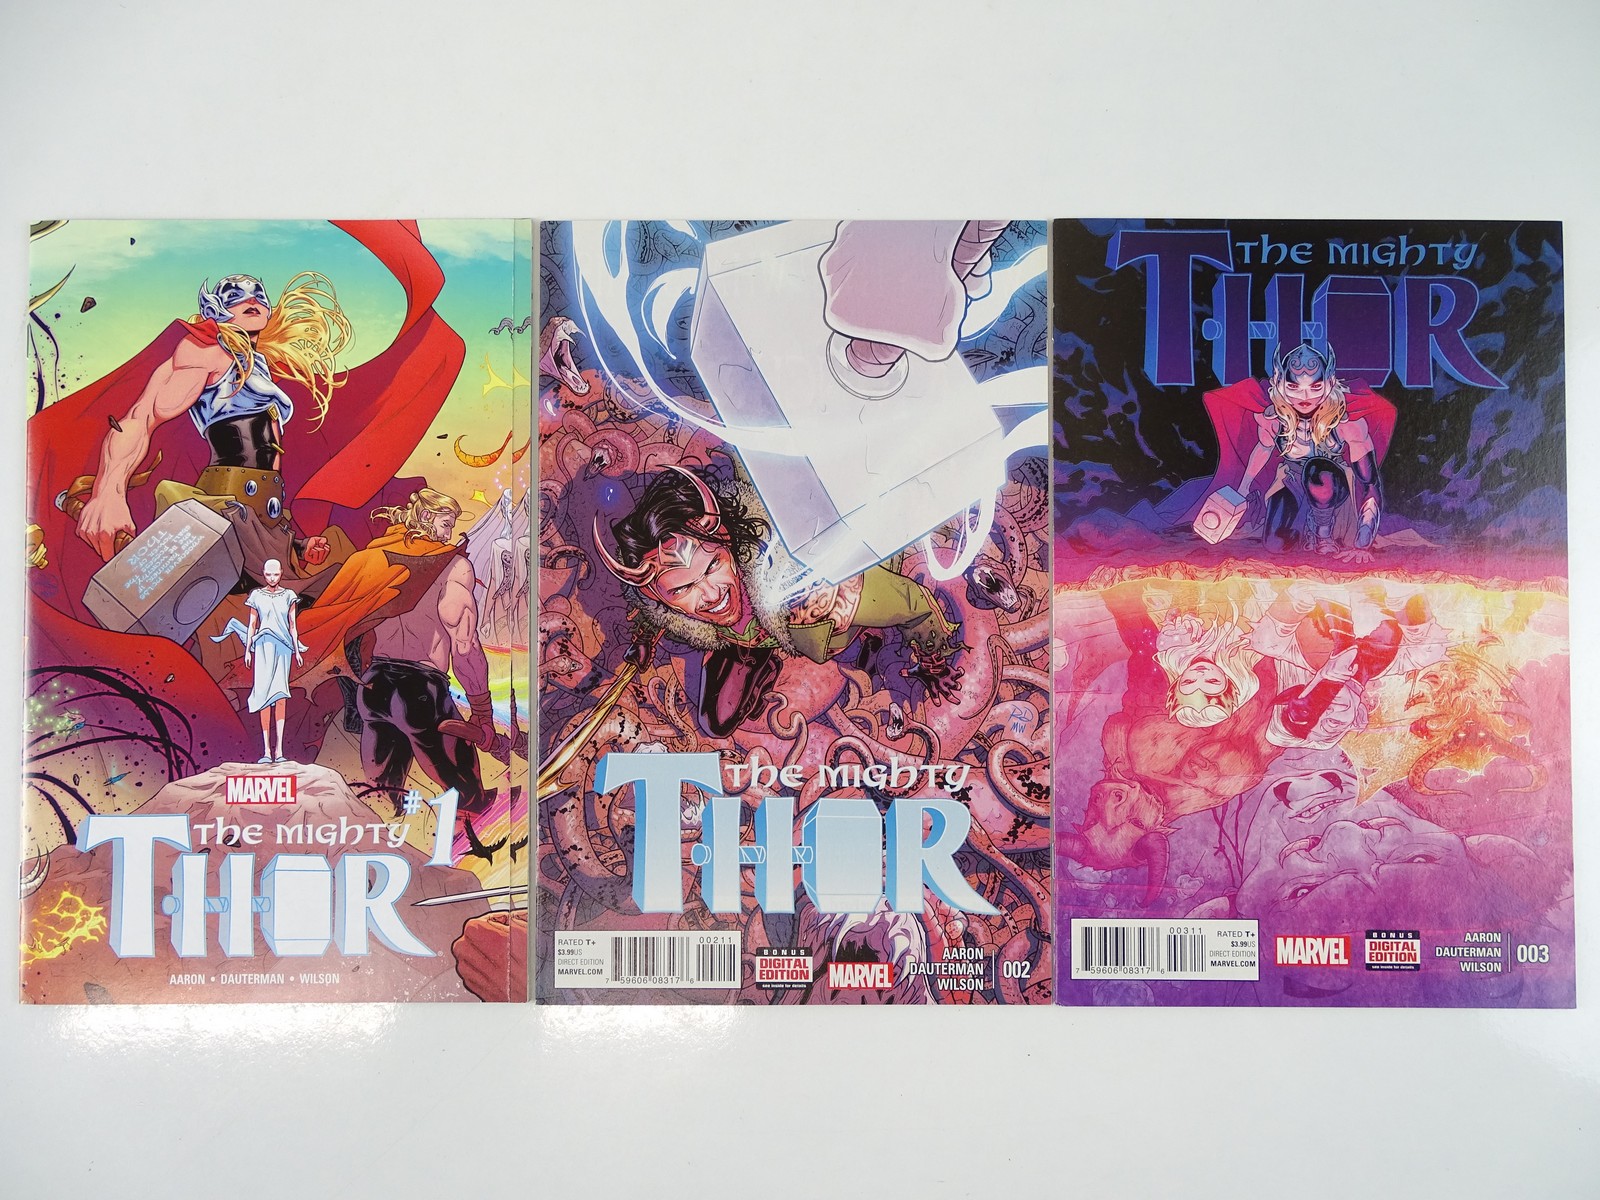 THE MIGHTY THOR #1, 2, 3 - (3 in Lot) - (2016 - MARVEL) - ALL First Prints - Flat/Unfolded